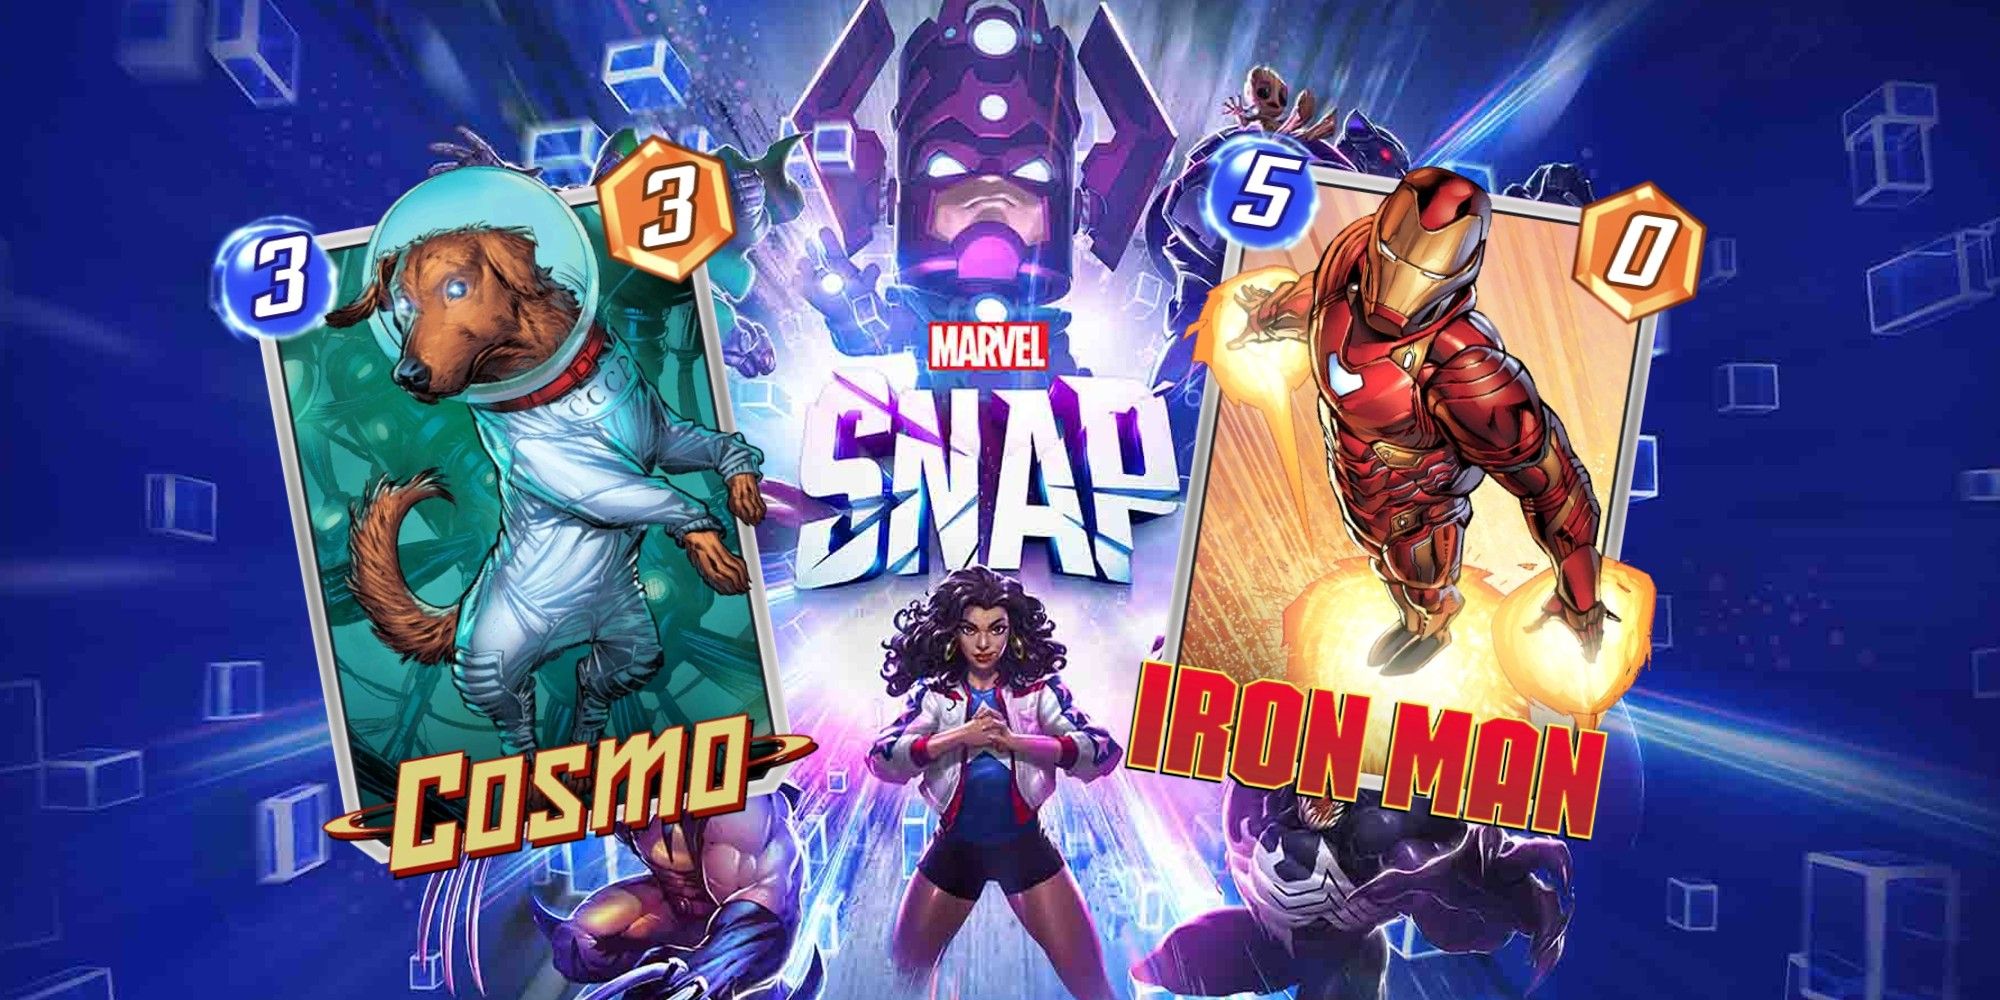 cosmo and iron man in front of the marvel snap logo